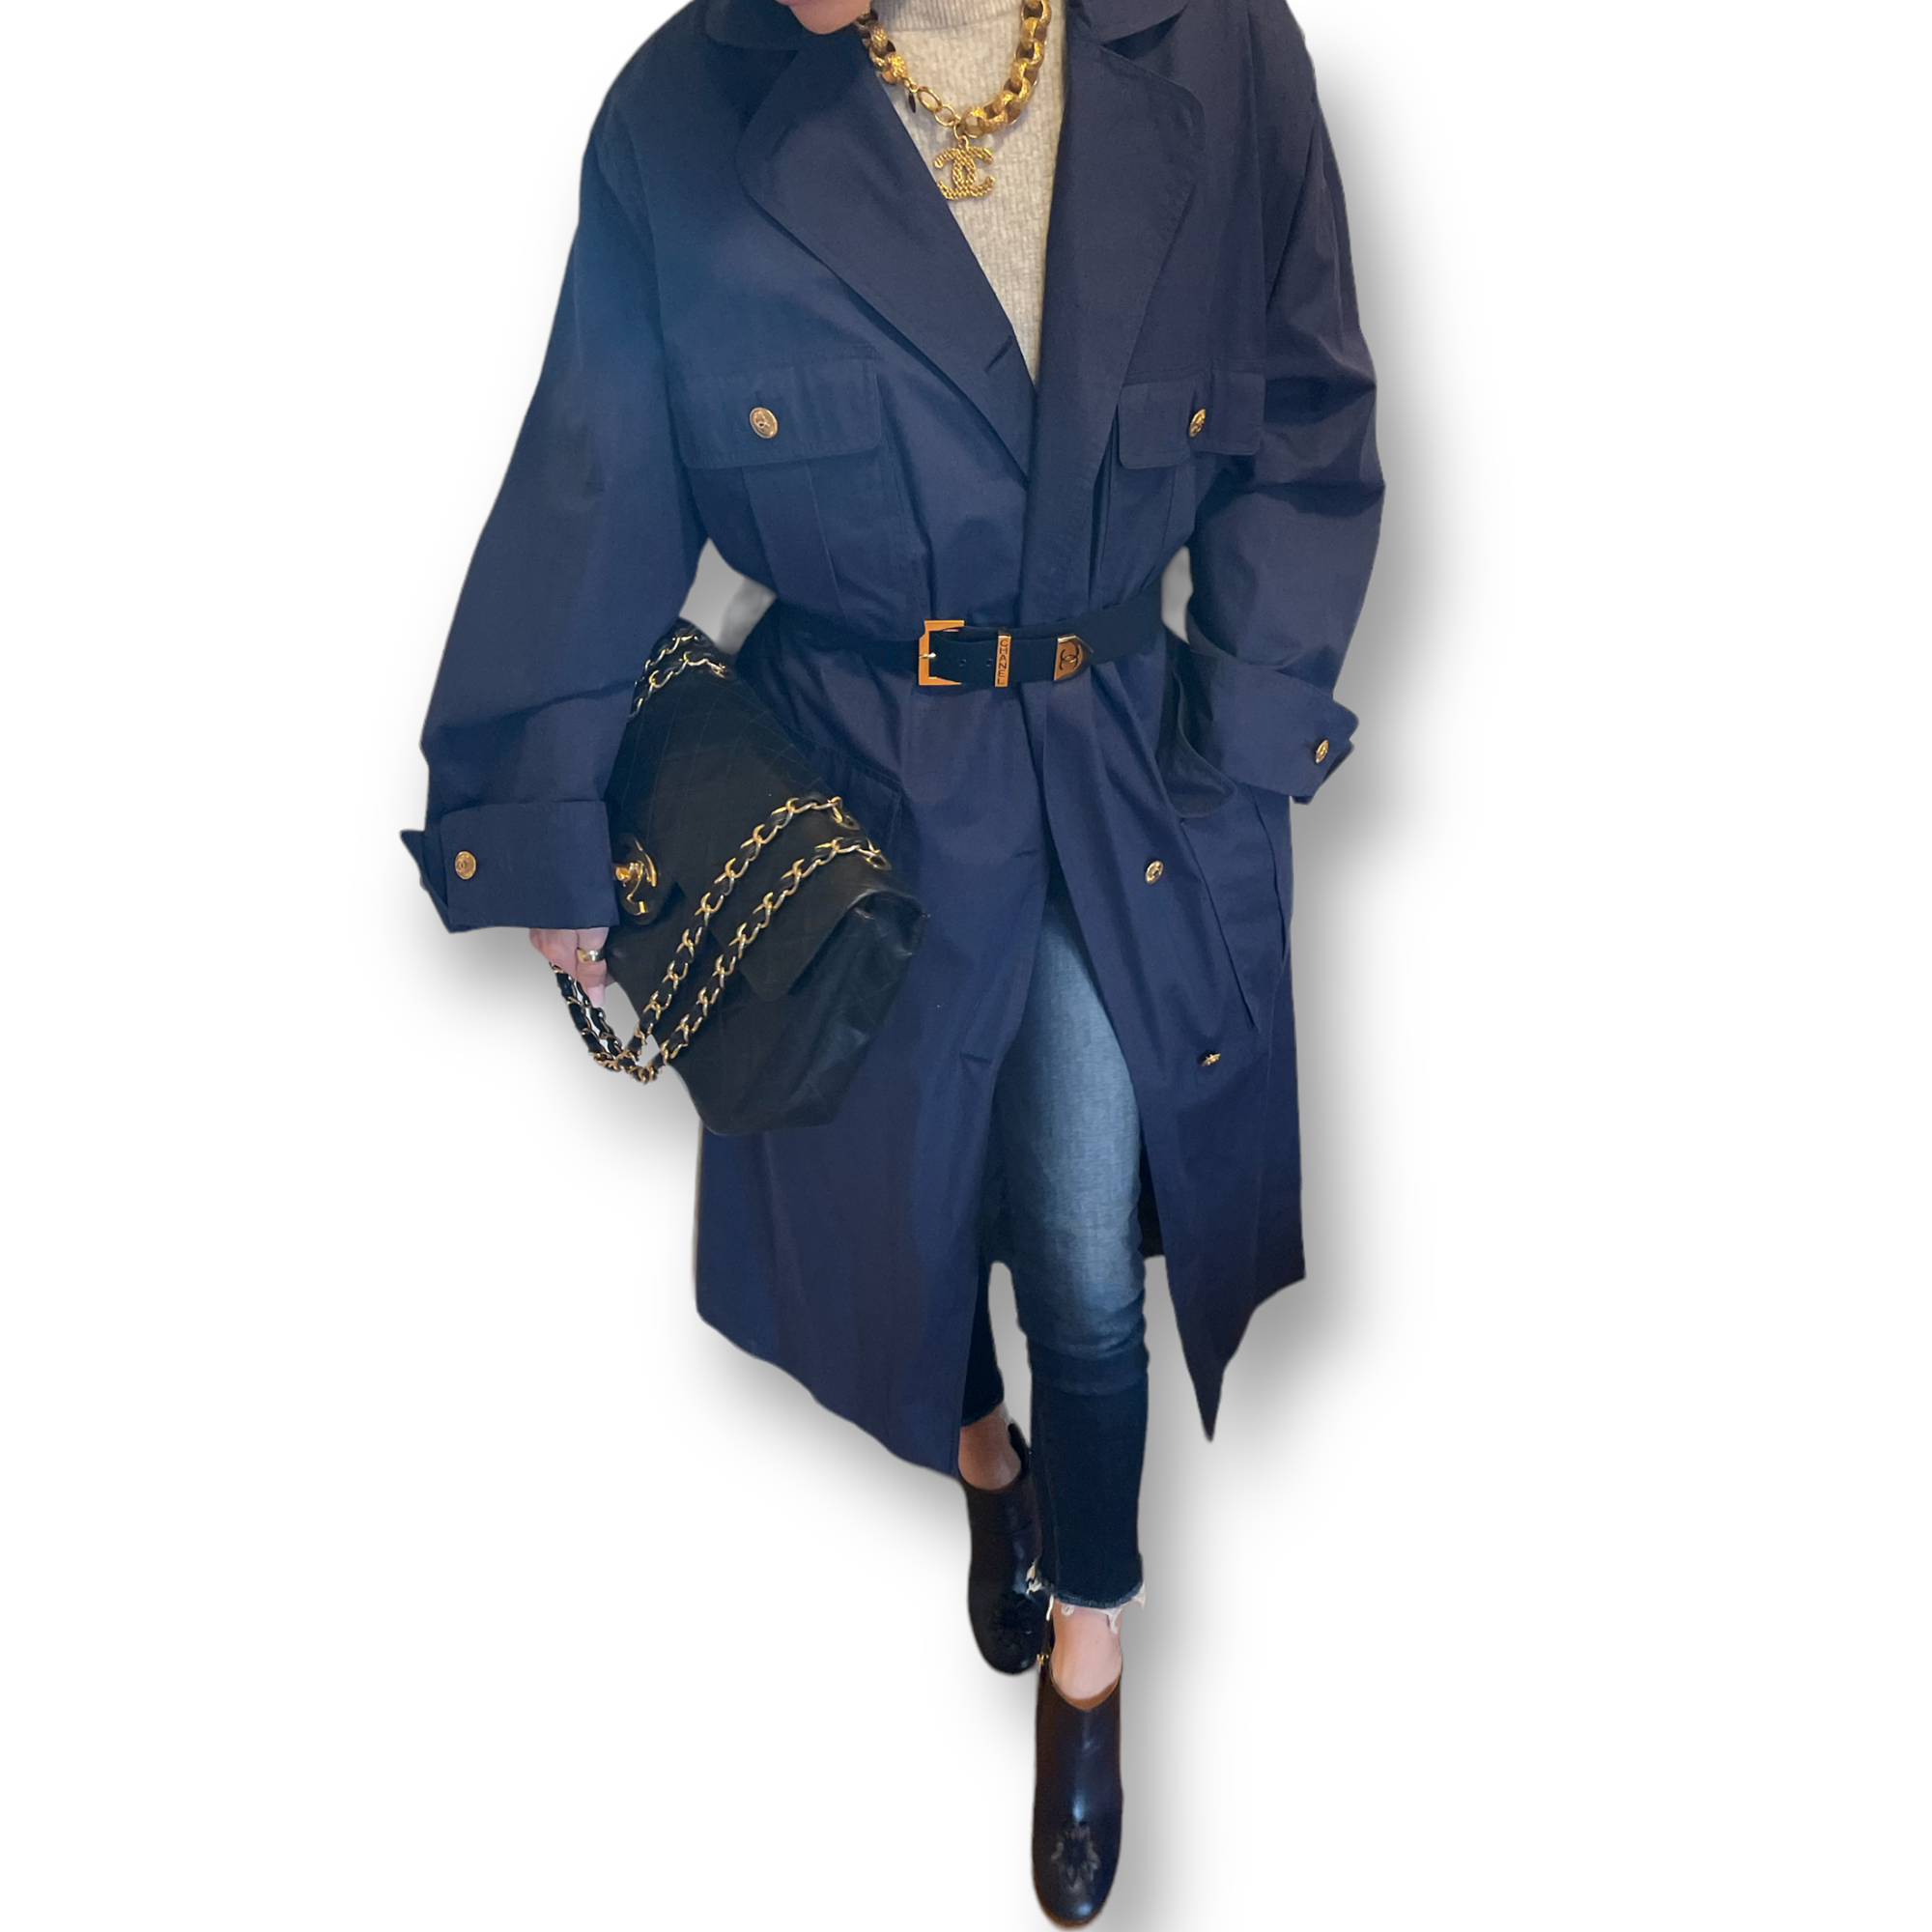 Vintage CHANEL Navy belted trench coat circa 1980